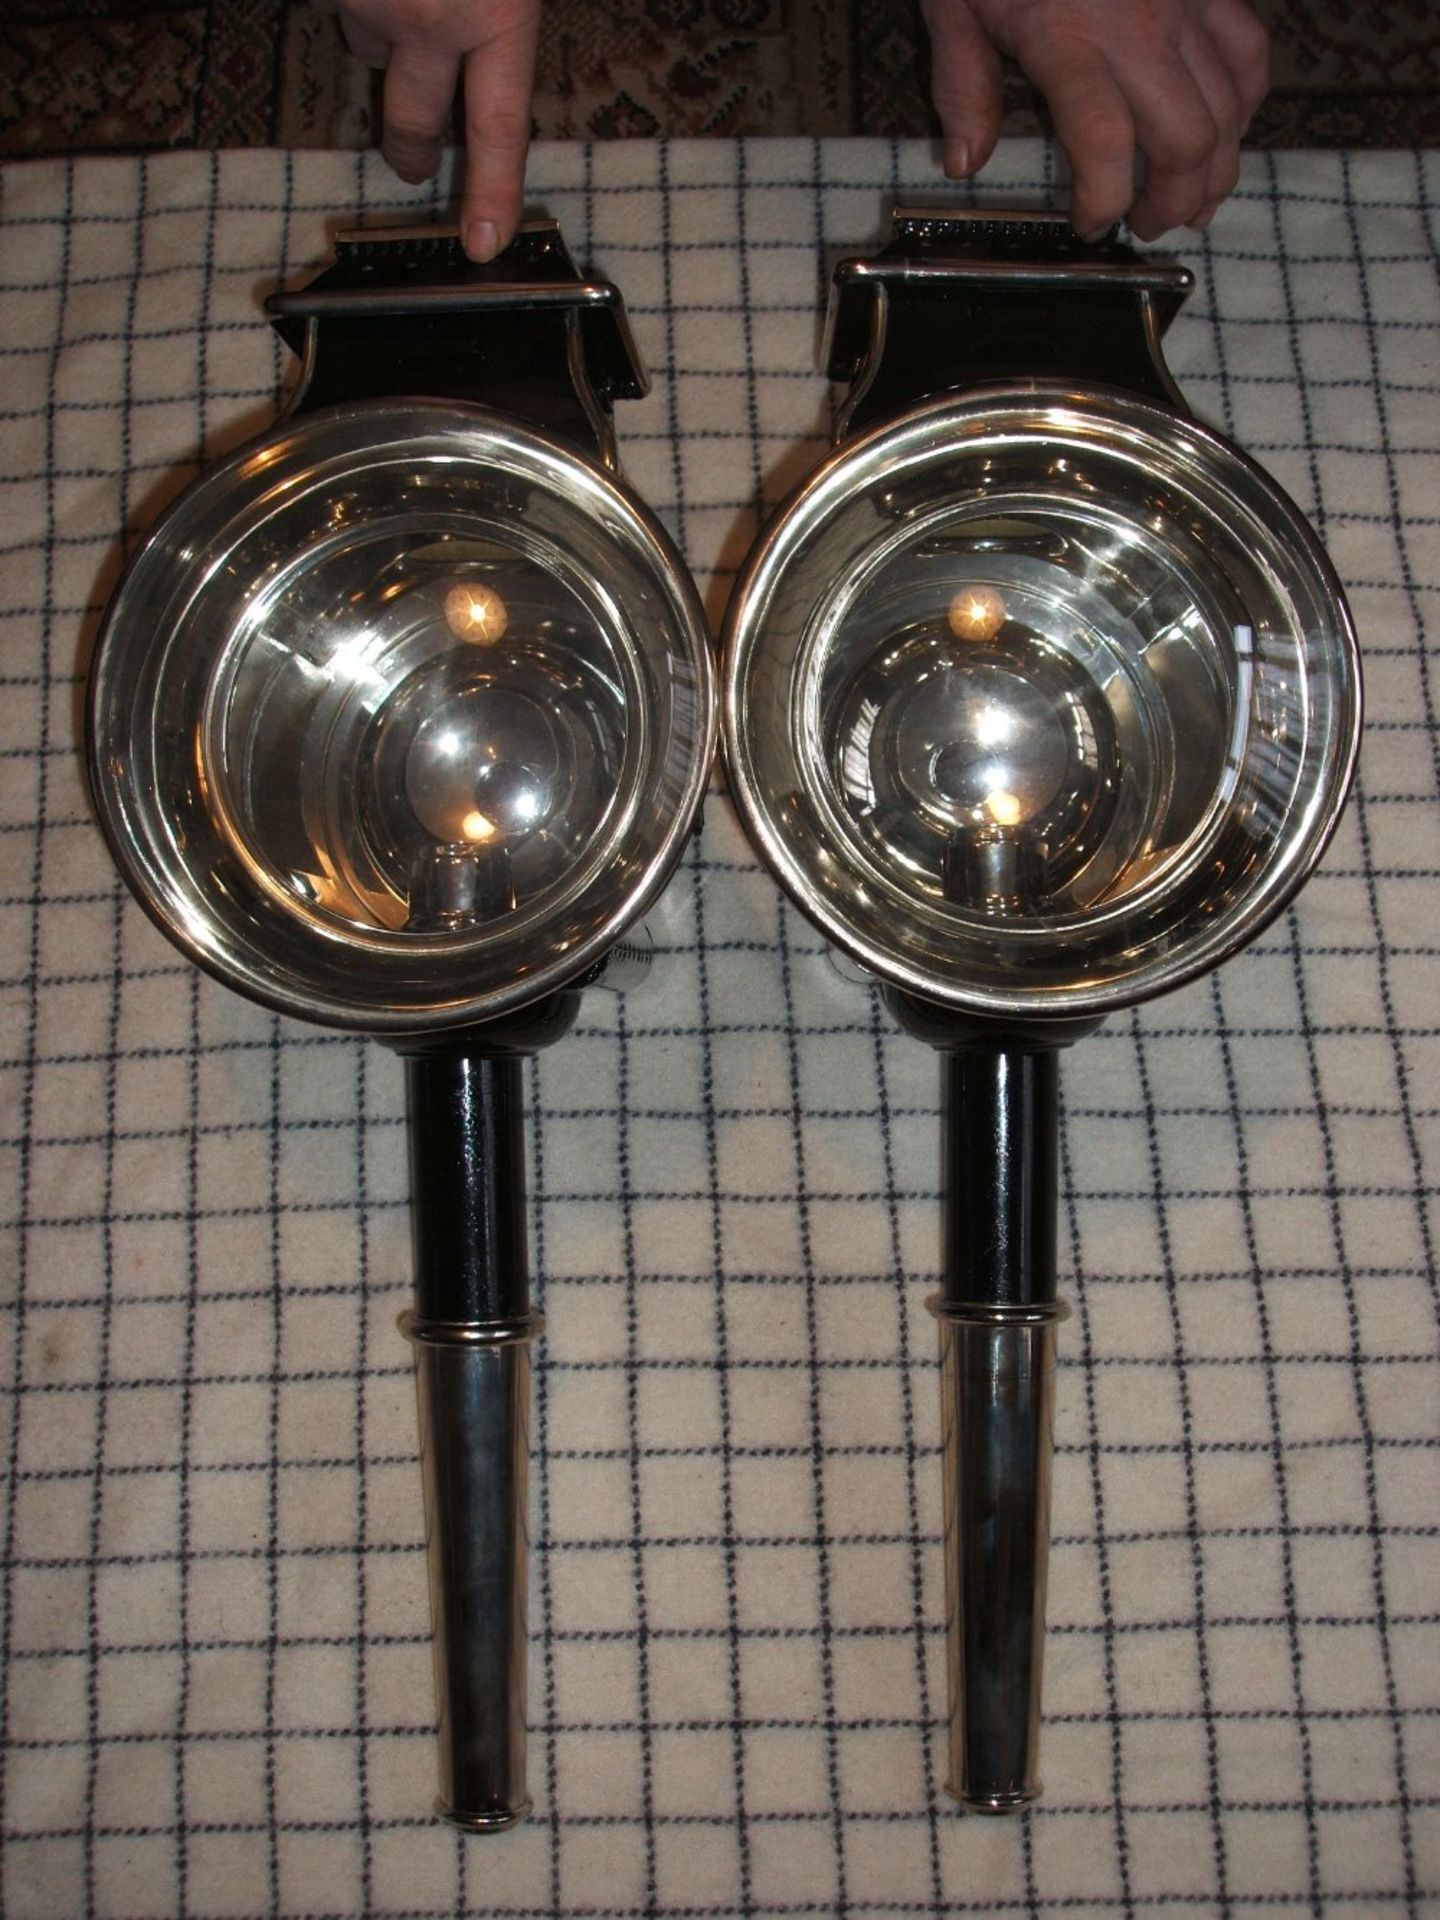 Pair of reproduction whitemetal Drag lamps with convex lenses, approx. 22ins high (view in